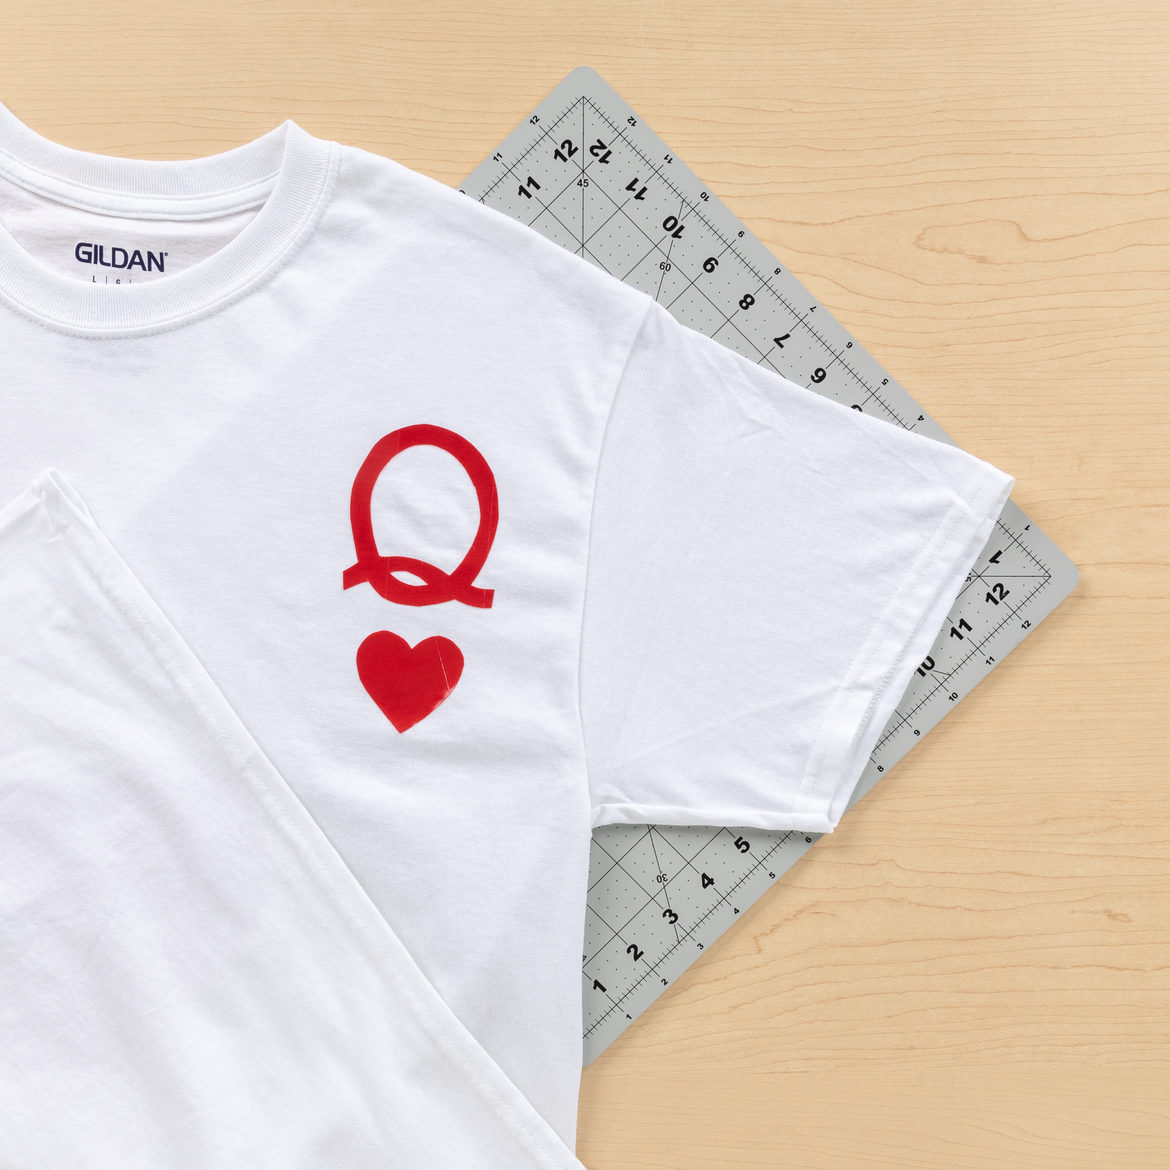 cut outs from the previous step attached to the T-shirt to resemble a playing card